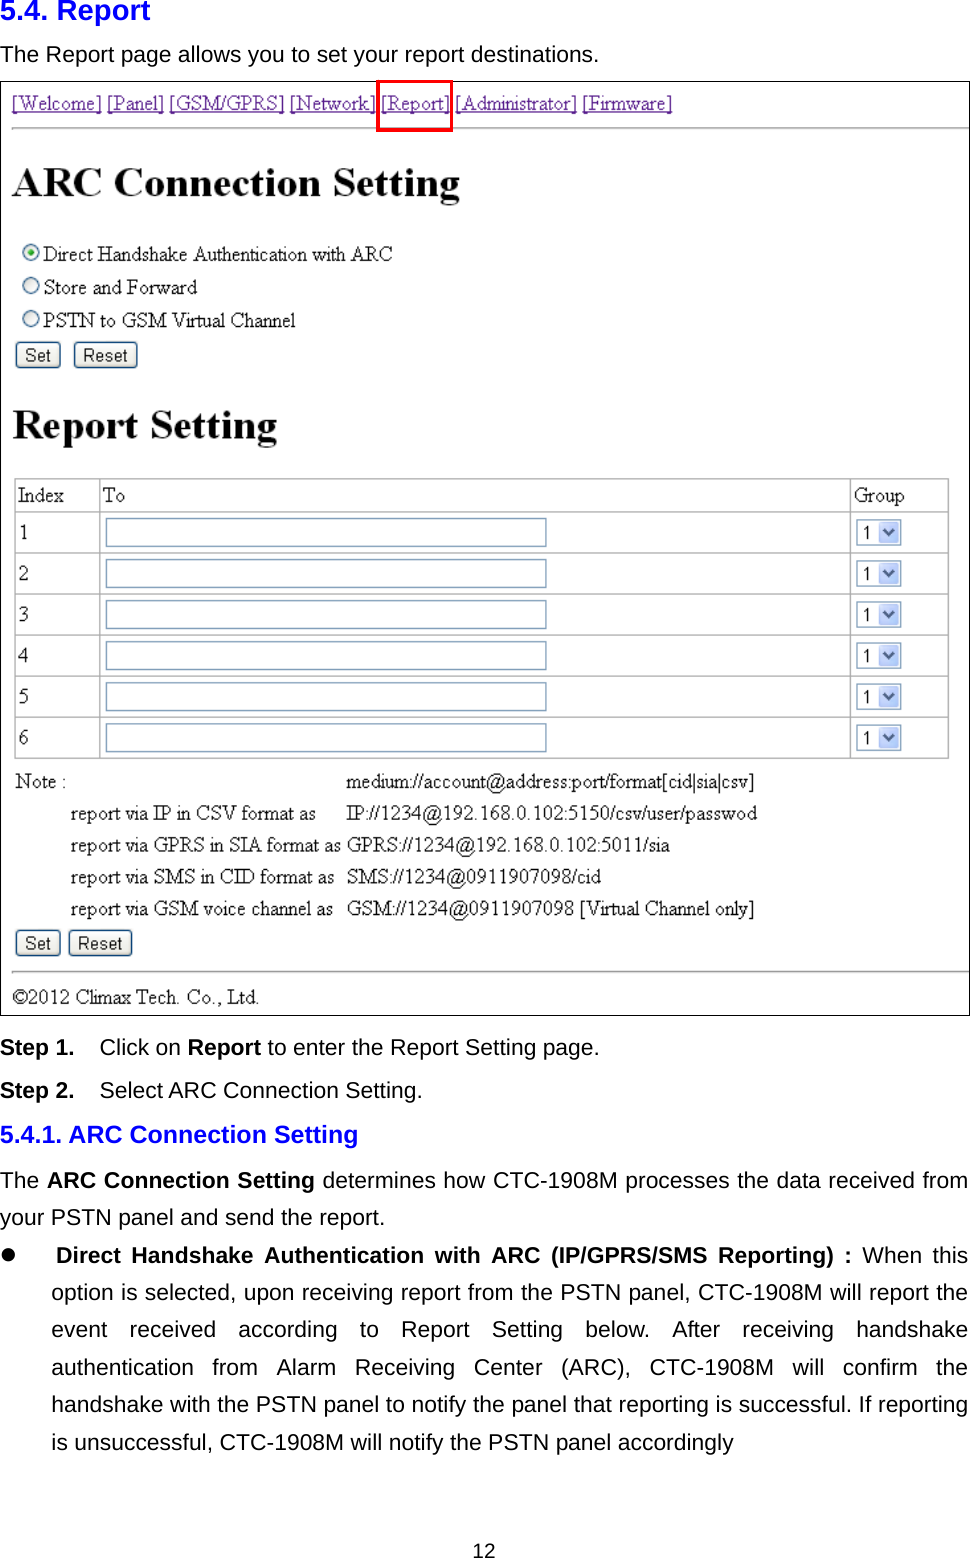  125.4. Report   The Report page allows you to set your report destinations.  Step 1. Click on Report to enter the Report Setting page. Step 2. Select ARC Connection Setting.  5.4.1. ARC Connection Setting The ARC Connection Setting determines how CTC-1908M processes the data received from your PSTN panel and send the report.  Direct Handshake Authentication with ARC (IP/GPRS/SMS Reporting) : When this option is selected, upon receiving report from the PSTN panel, CTC-1908M will report the event received according to Report Setting below. After receiving handshake authentication from Alarm Receiving Center (ARC), CTC-1908M will confirm the handshake with the PSTN panel to notify the panel that reporting is successful. If reporting is unsuccessful, CTC-1908M will notify the PSTN panel accordingly   